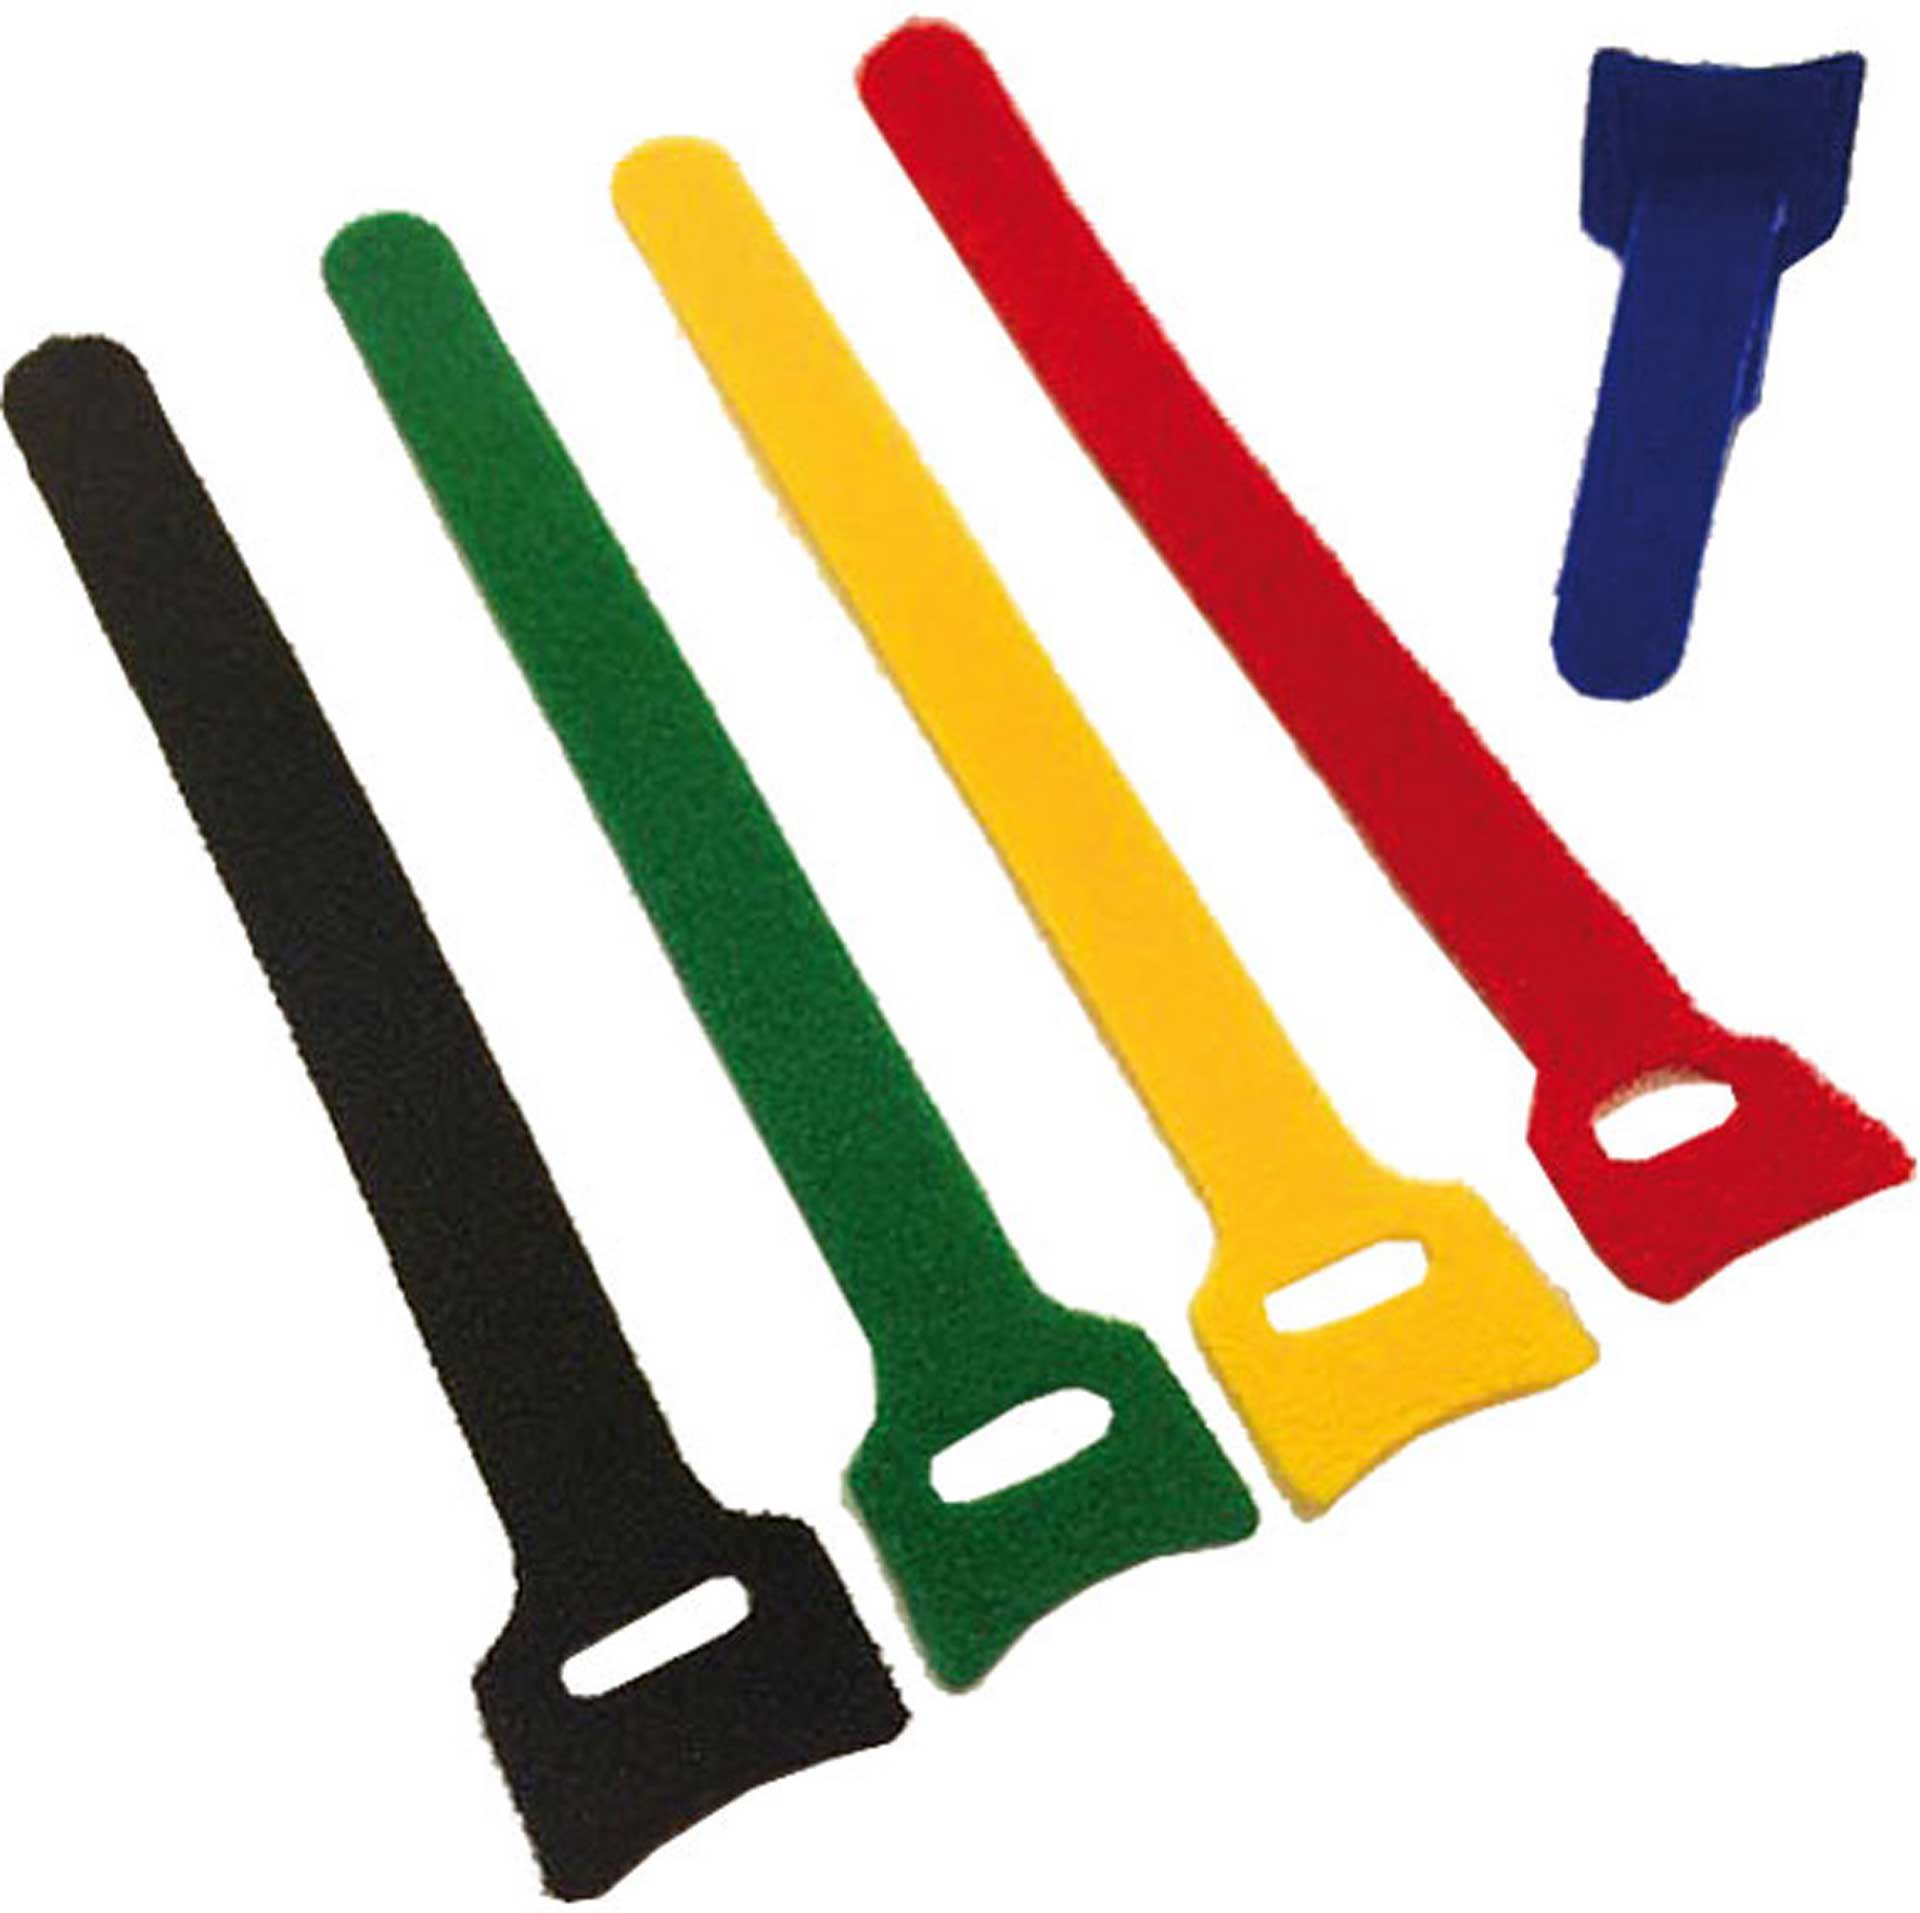 Robbe Modellsport VELCRO STRAP 13/160MM 5pcs ASSORTED COL ORS